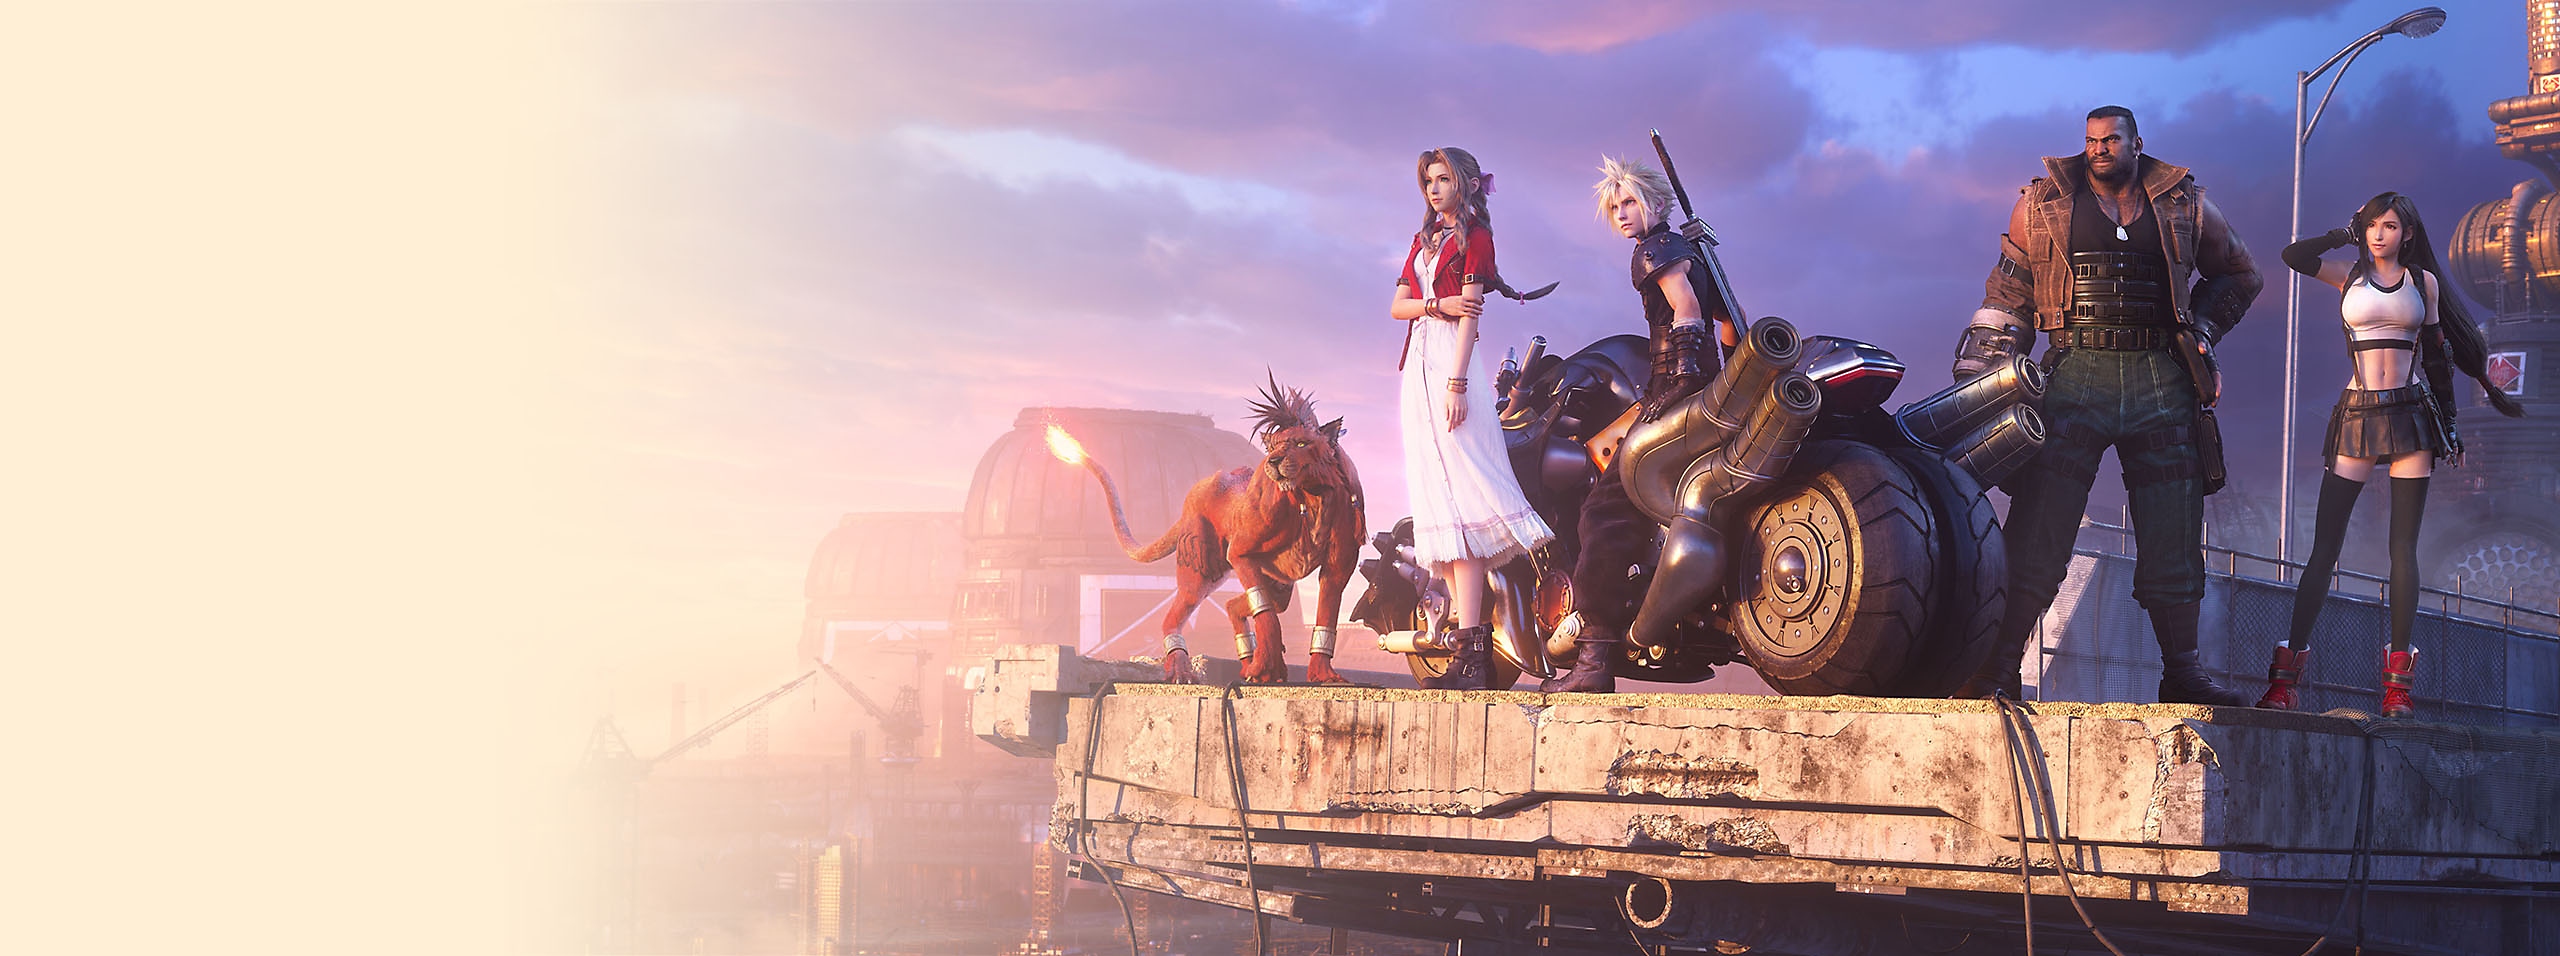 Key art for Final Fantasy VII Remake, featuring (left-to-right) Red XIII, Aerith, Cloud and Barret.